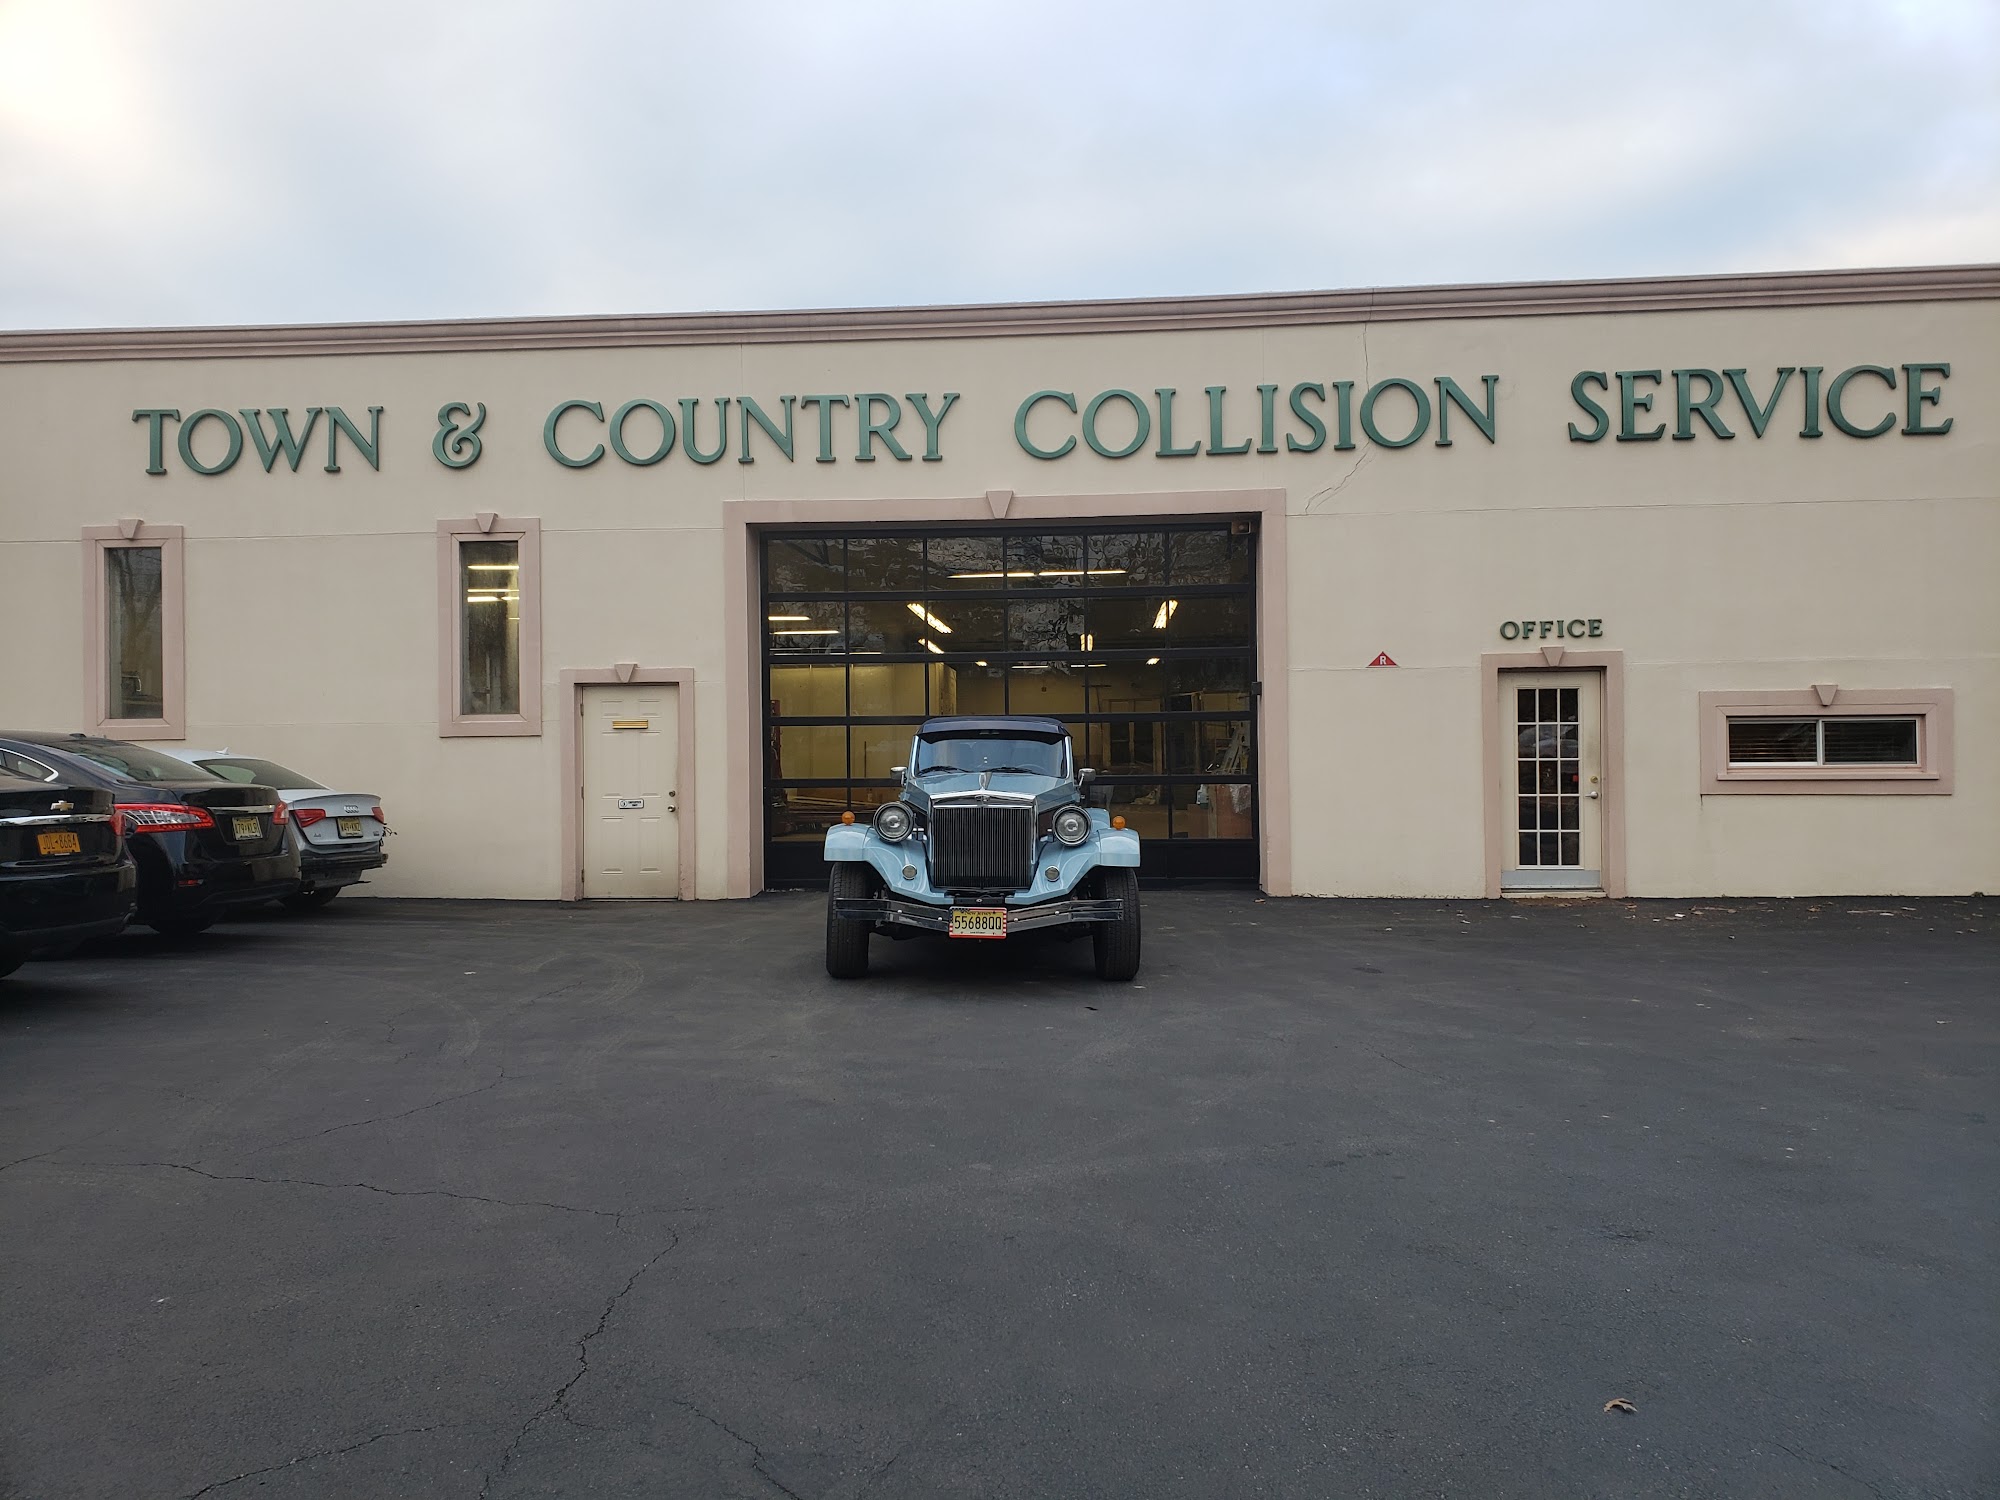 Town & Country Collision Service